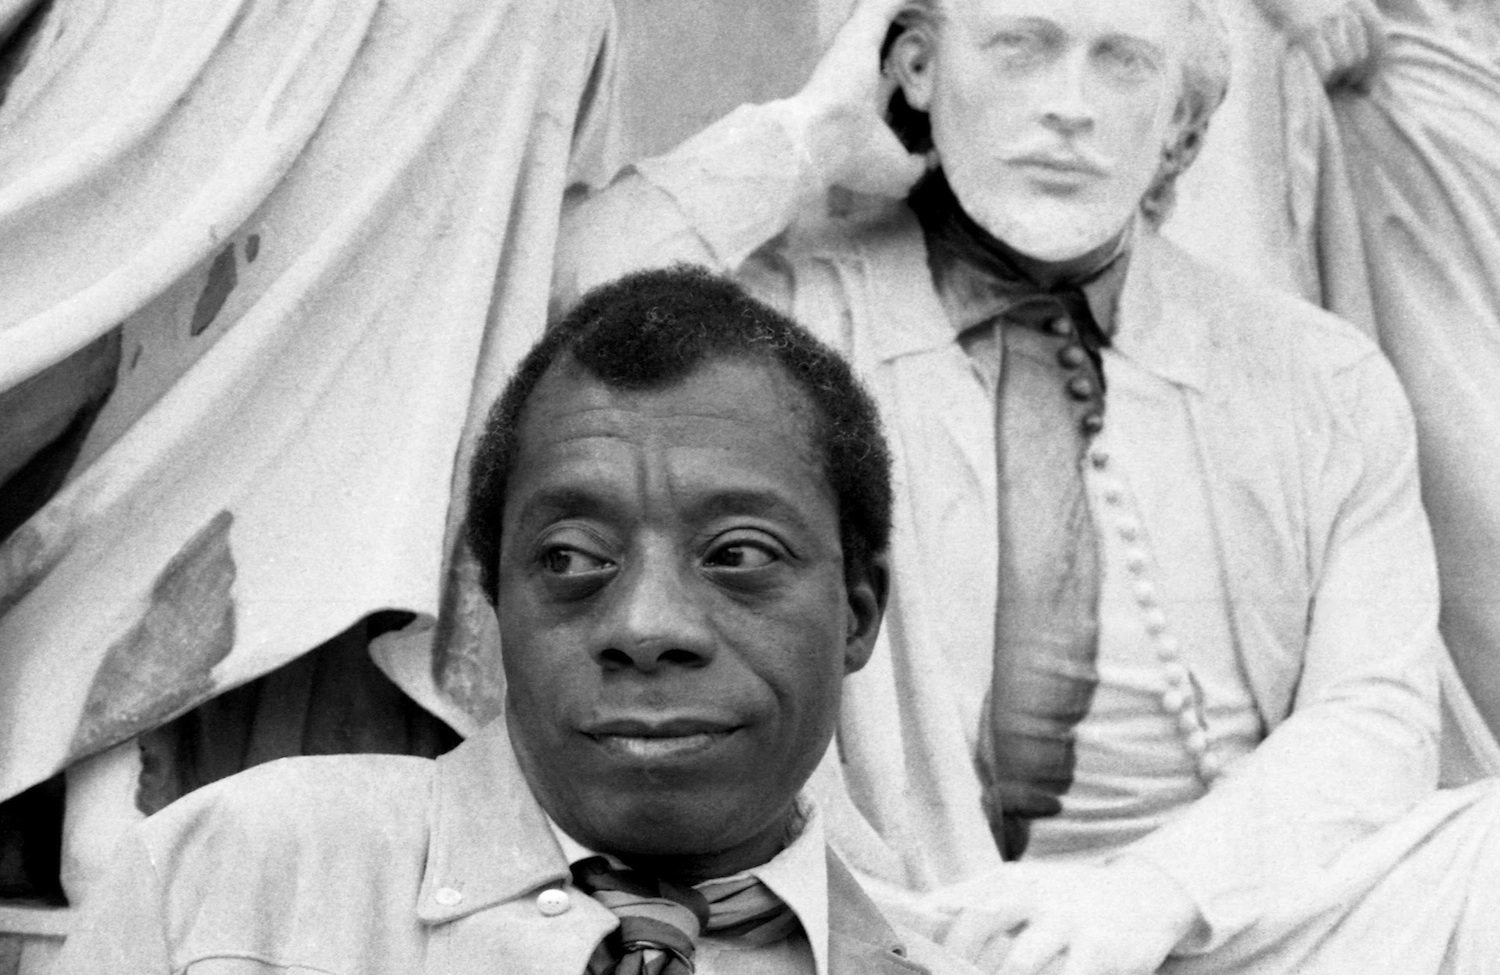 From ‘Victim’ to ‘Threat’: James Baldwin and the Demands of Self-Respect